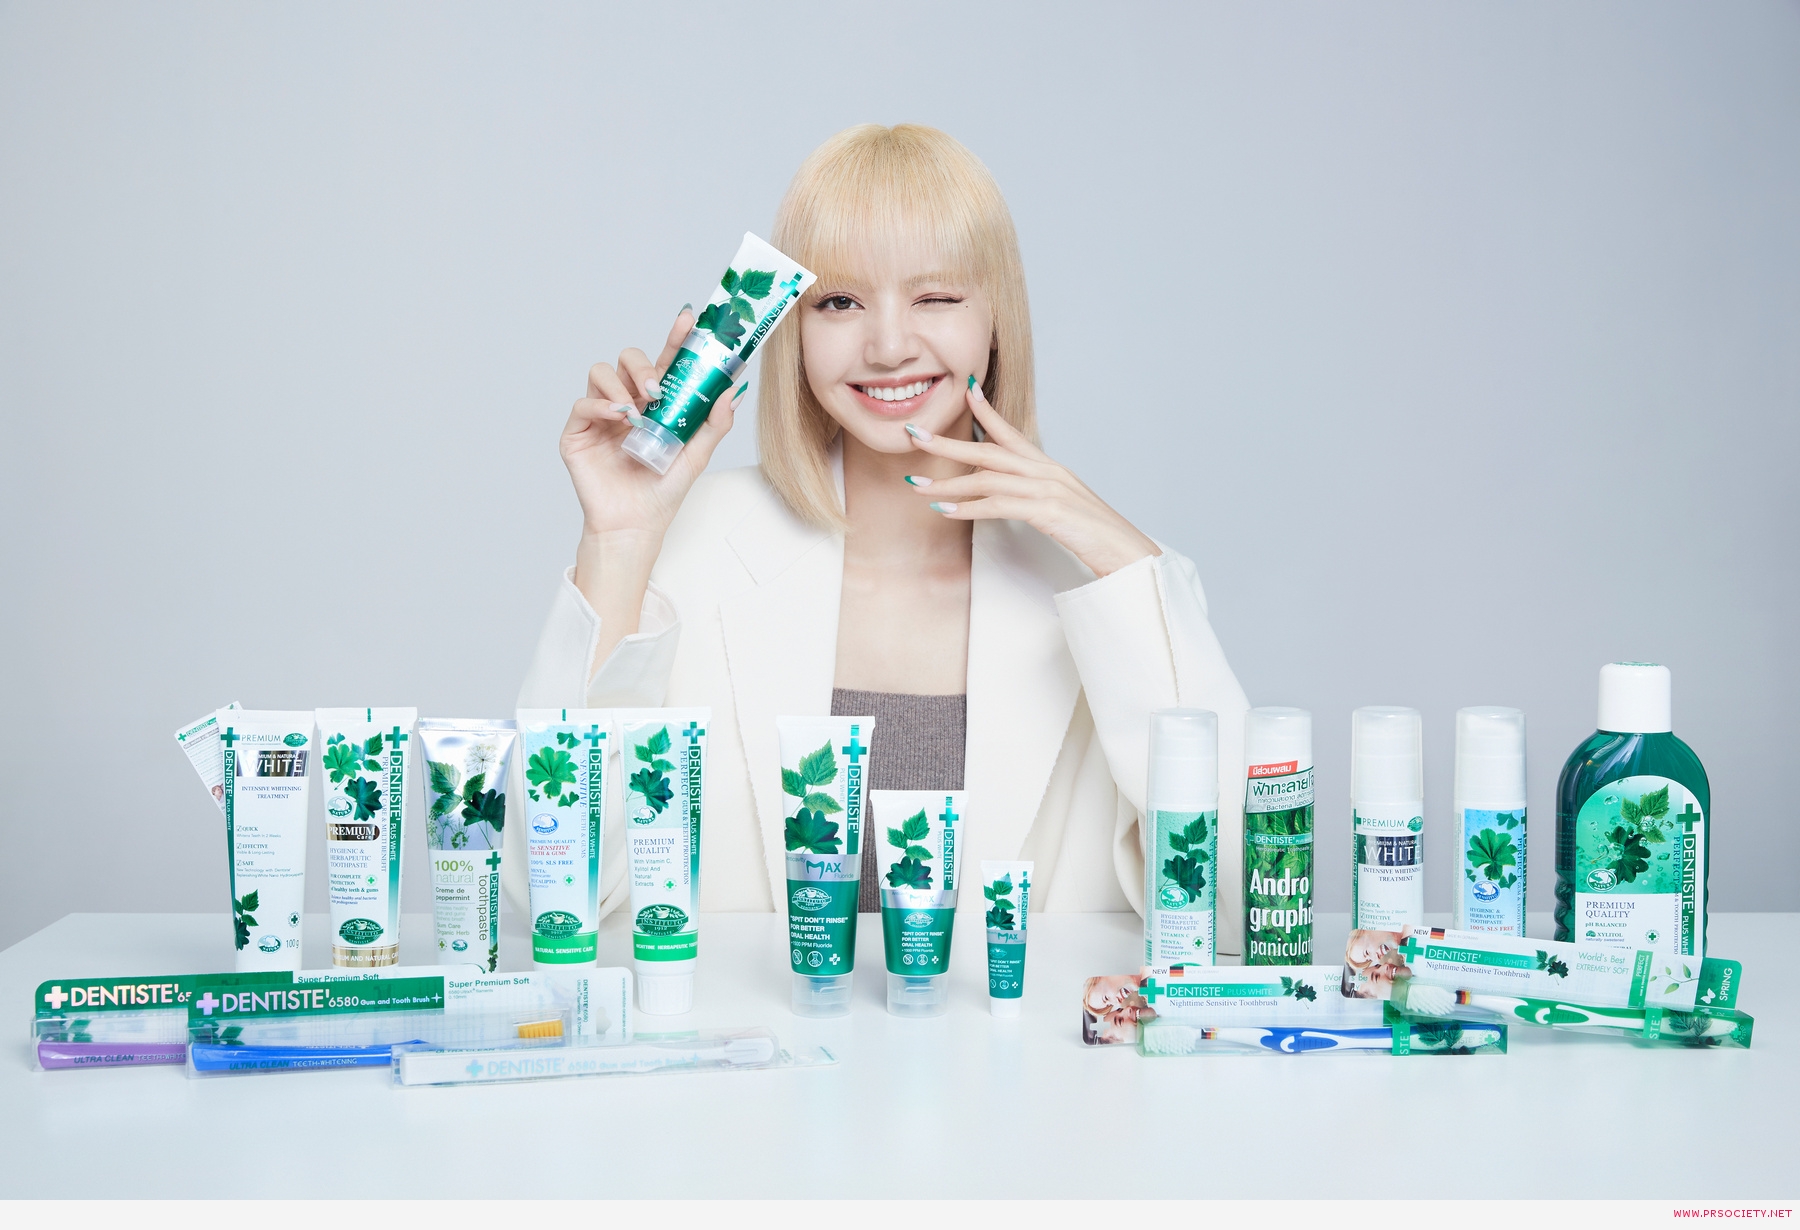 DENTISTE Presents Confident Smile with Lisa6